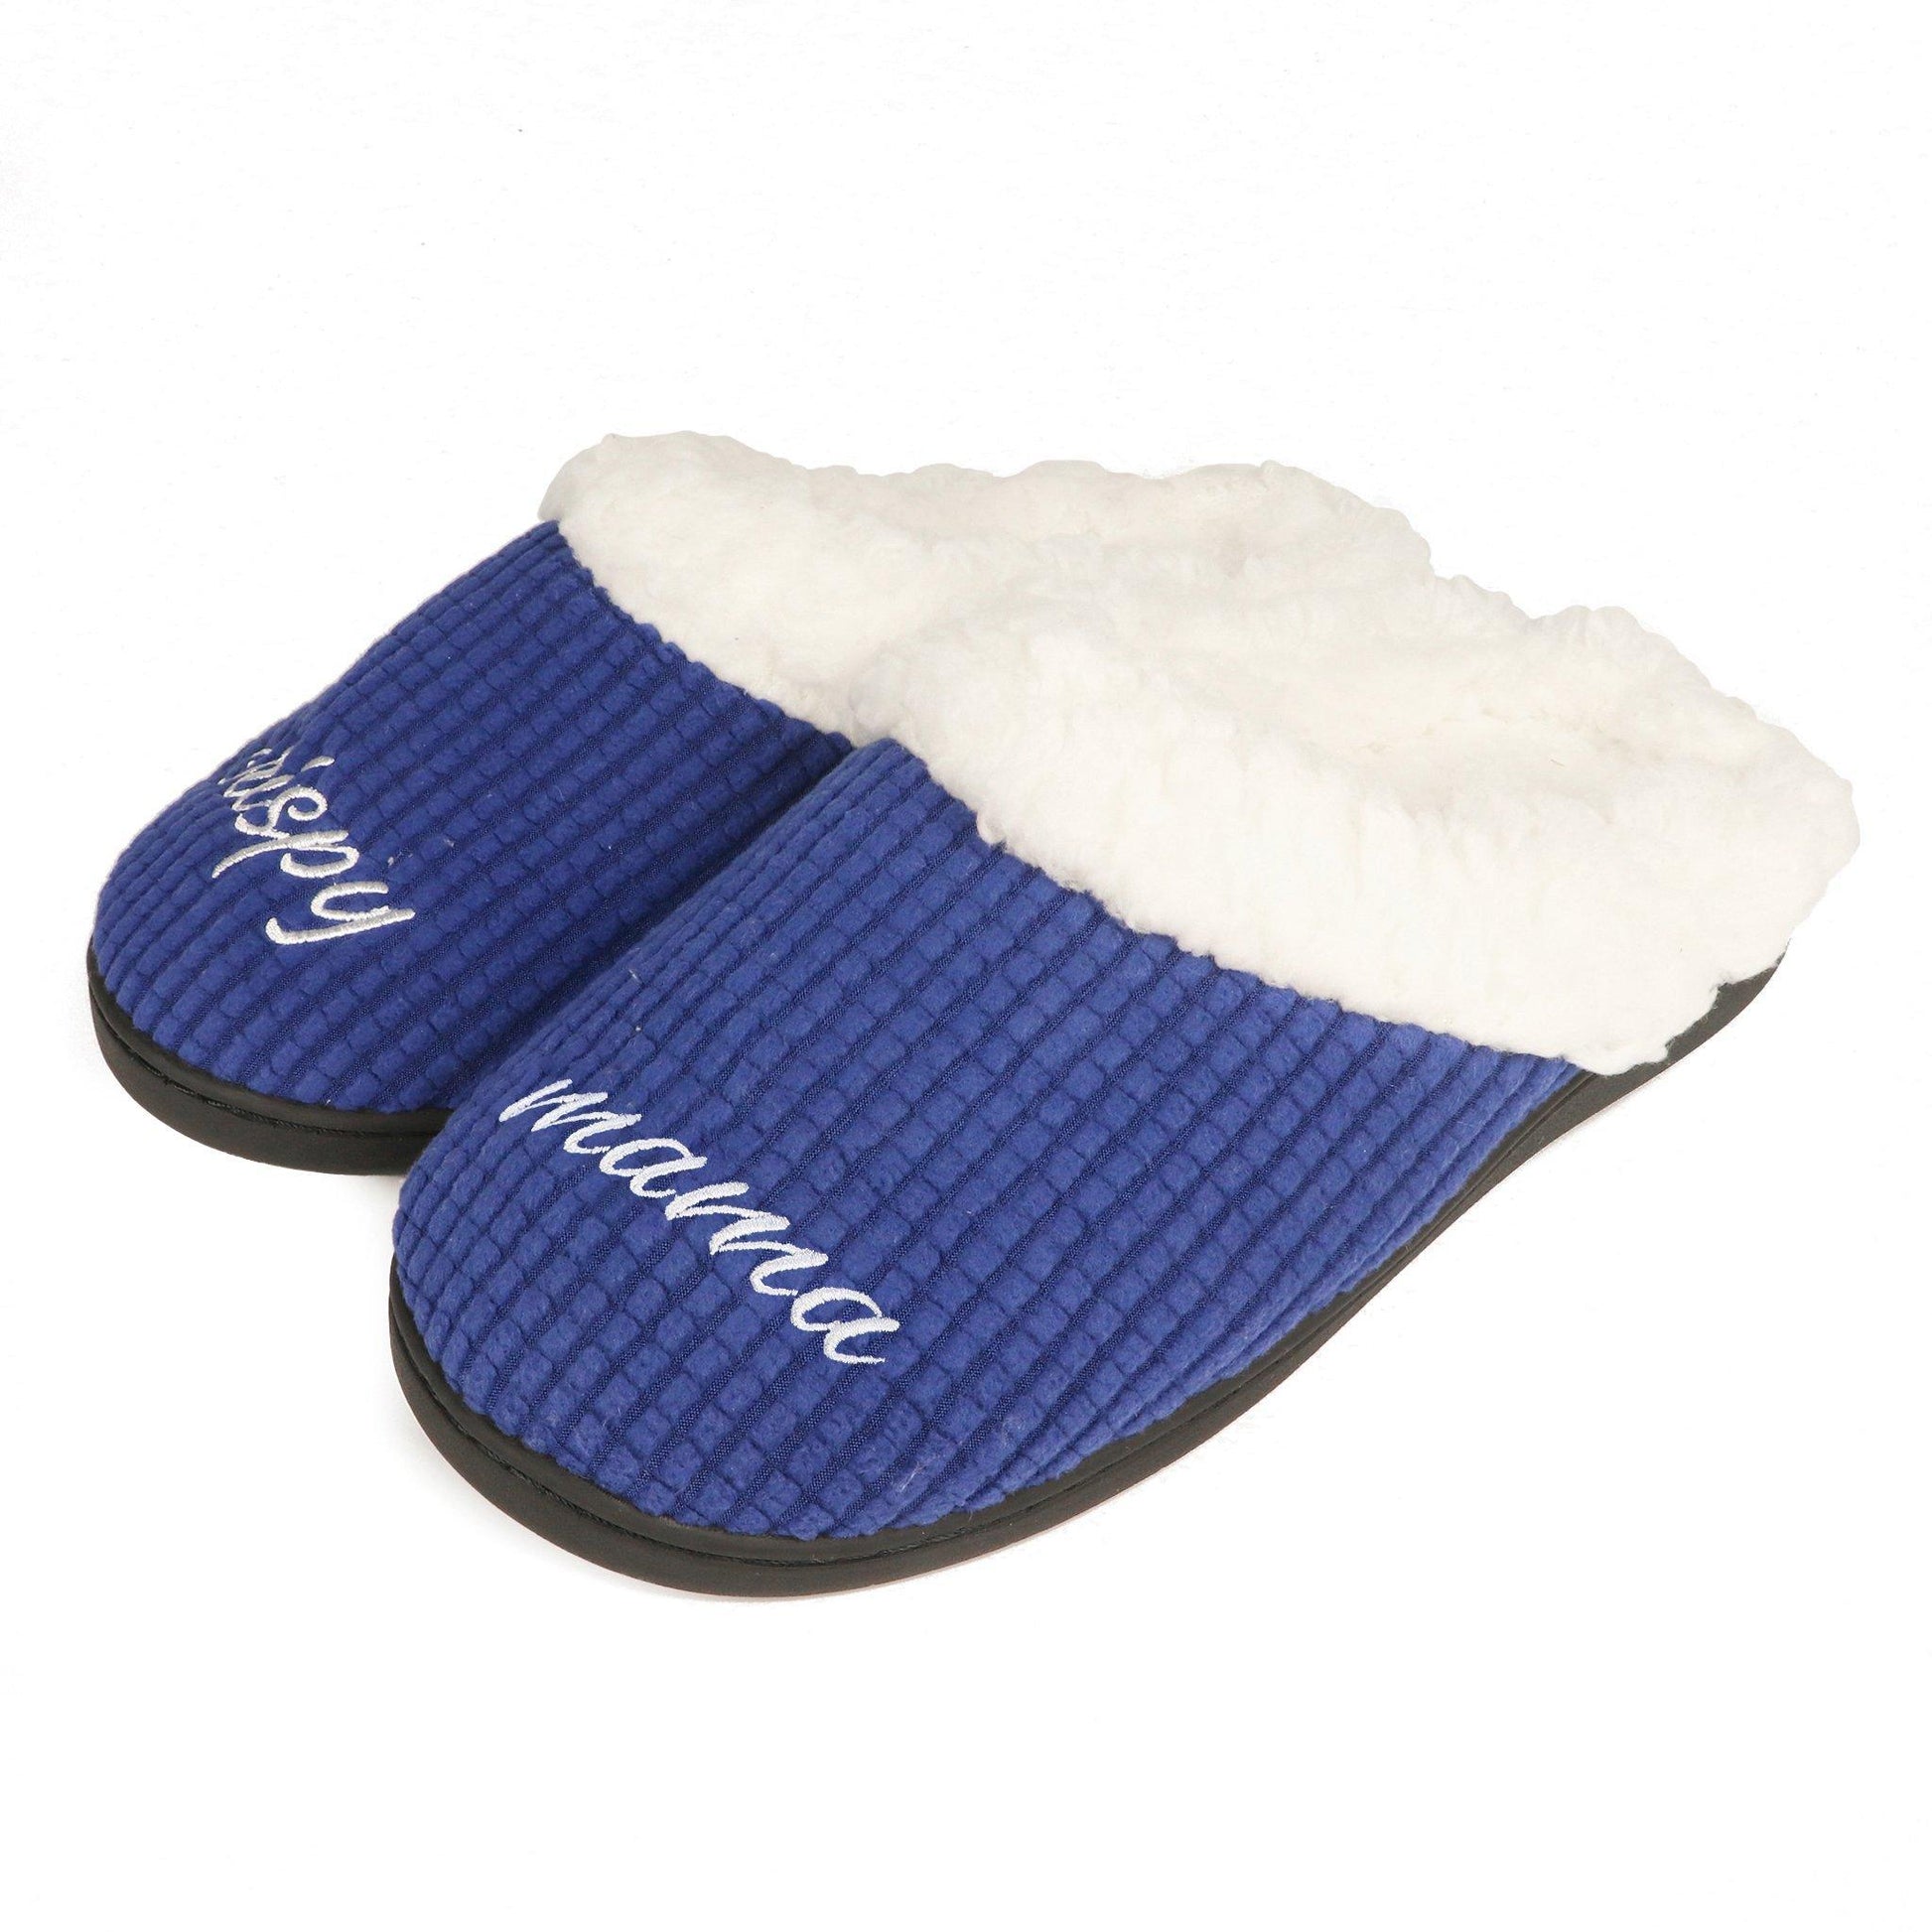 blue and white bud light slippers that say crispy on the right slipper and mama on the left